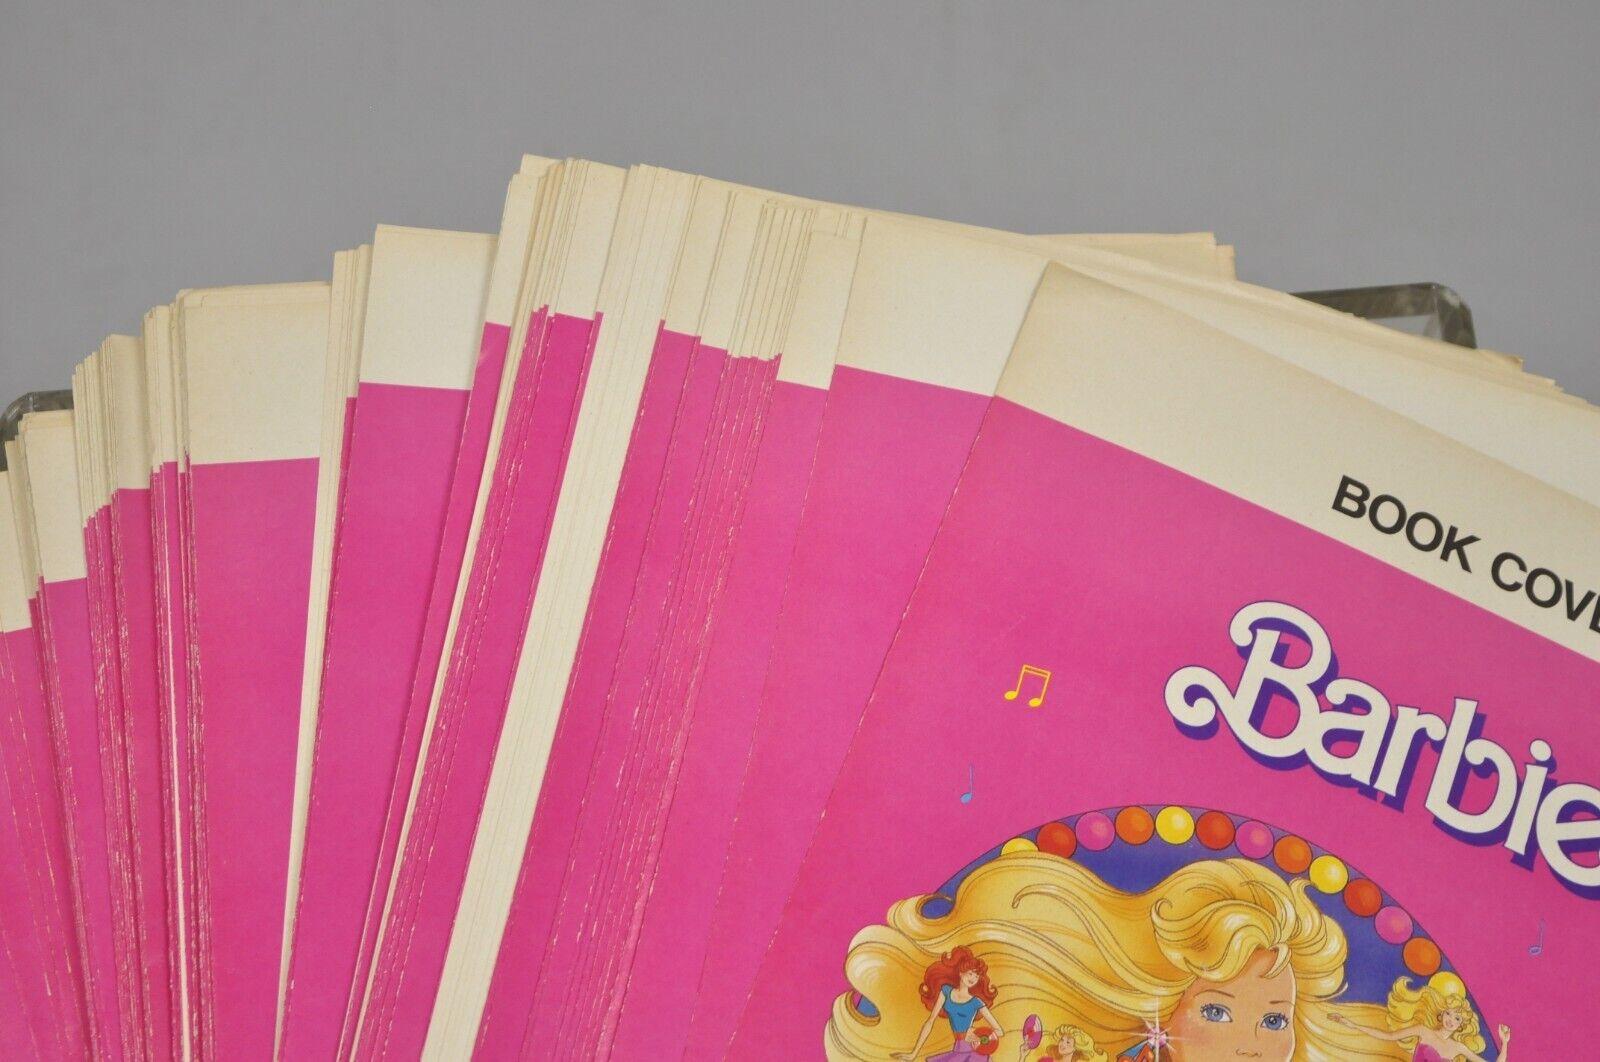 Vintage 1989 Barbie Mattel Original Pink Paper Book Covers NOS - Many Available For Sale 1